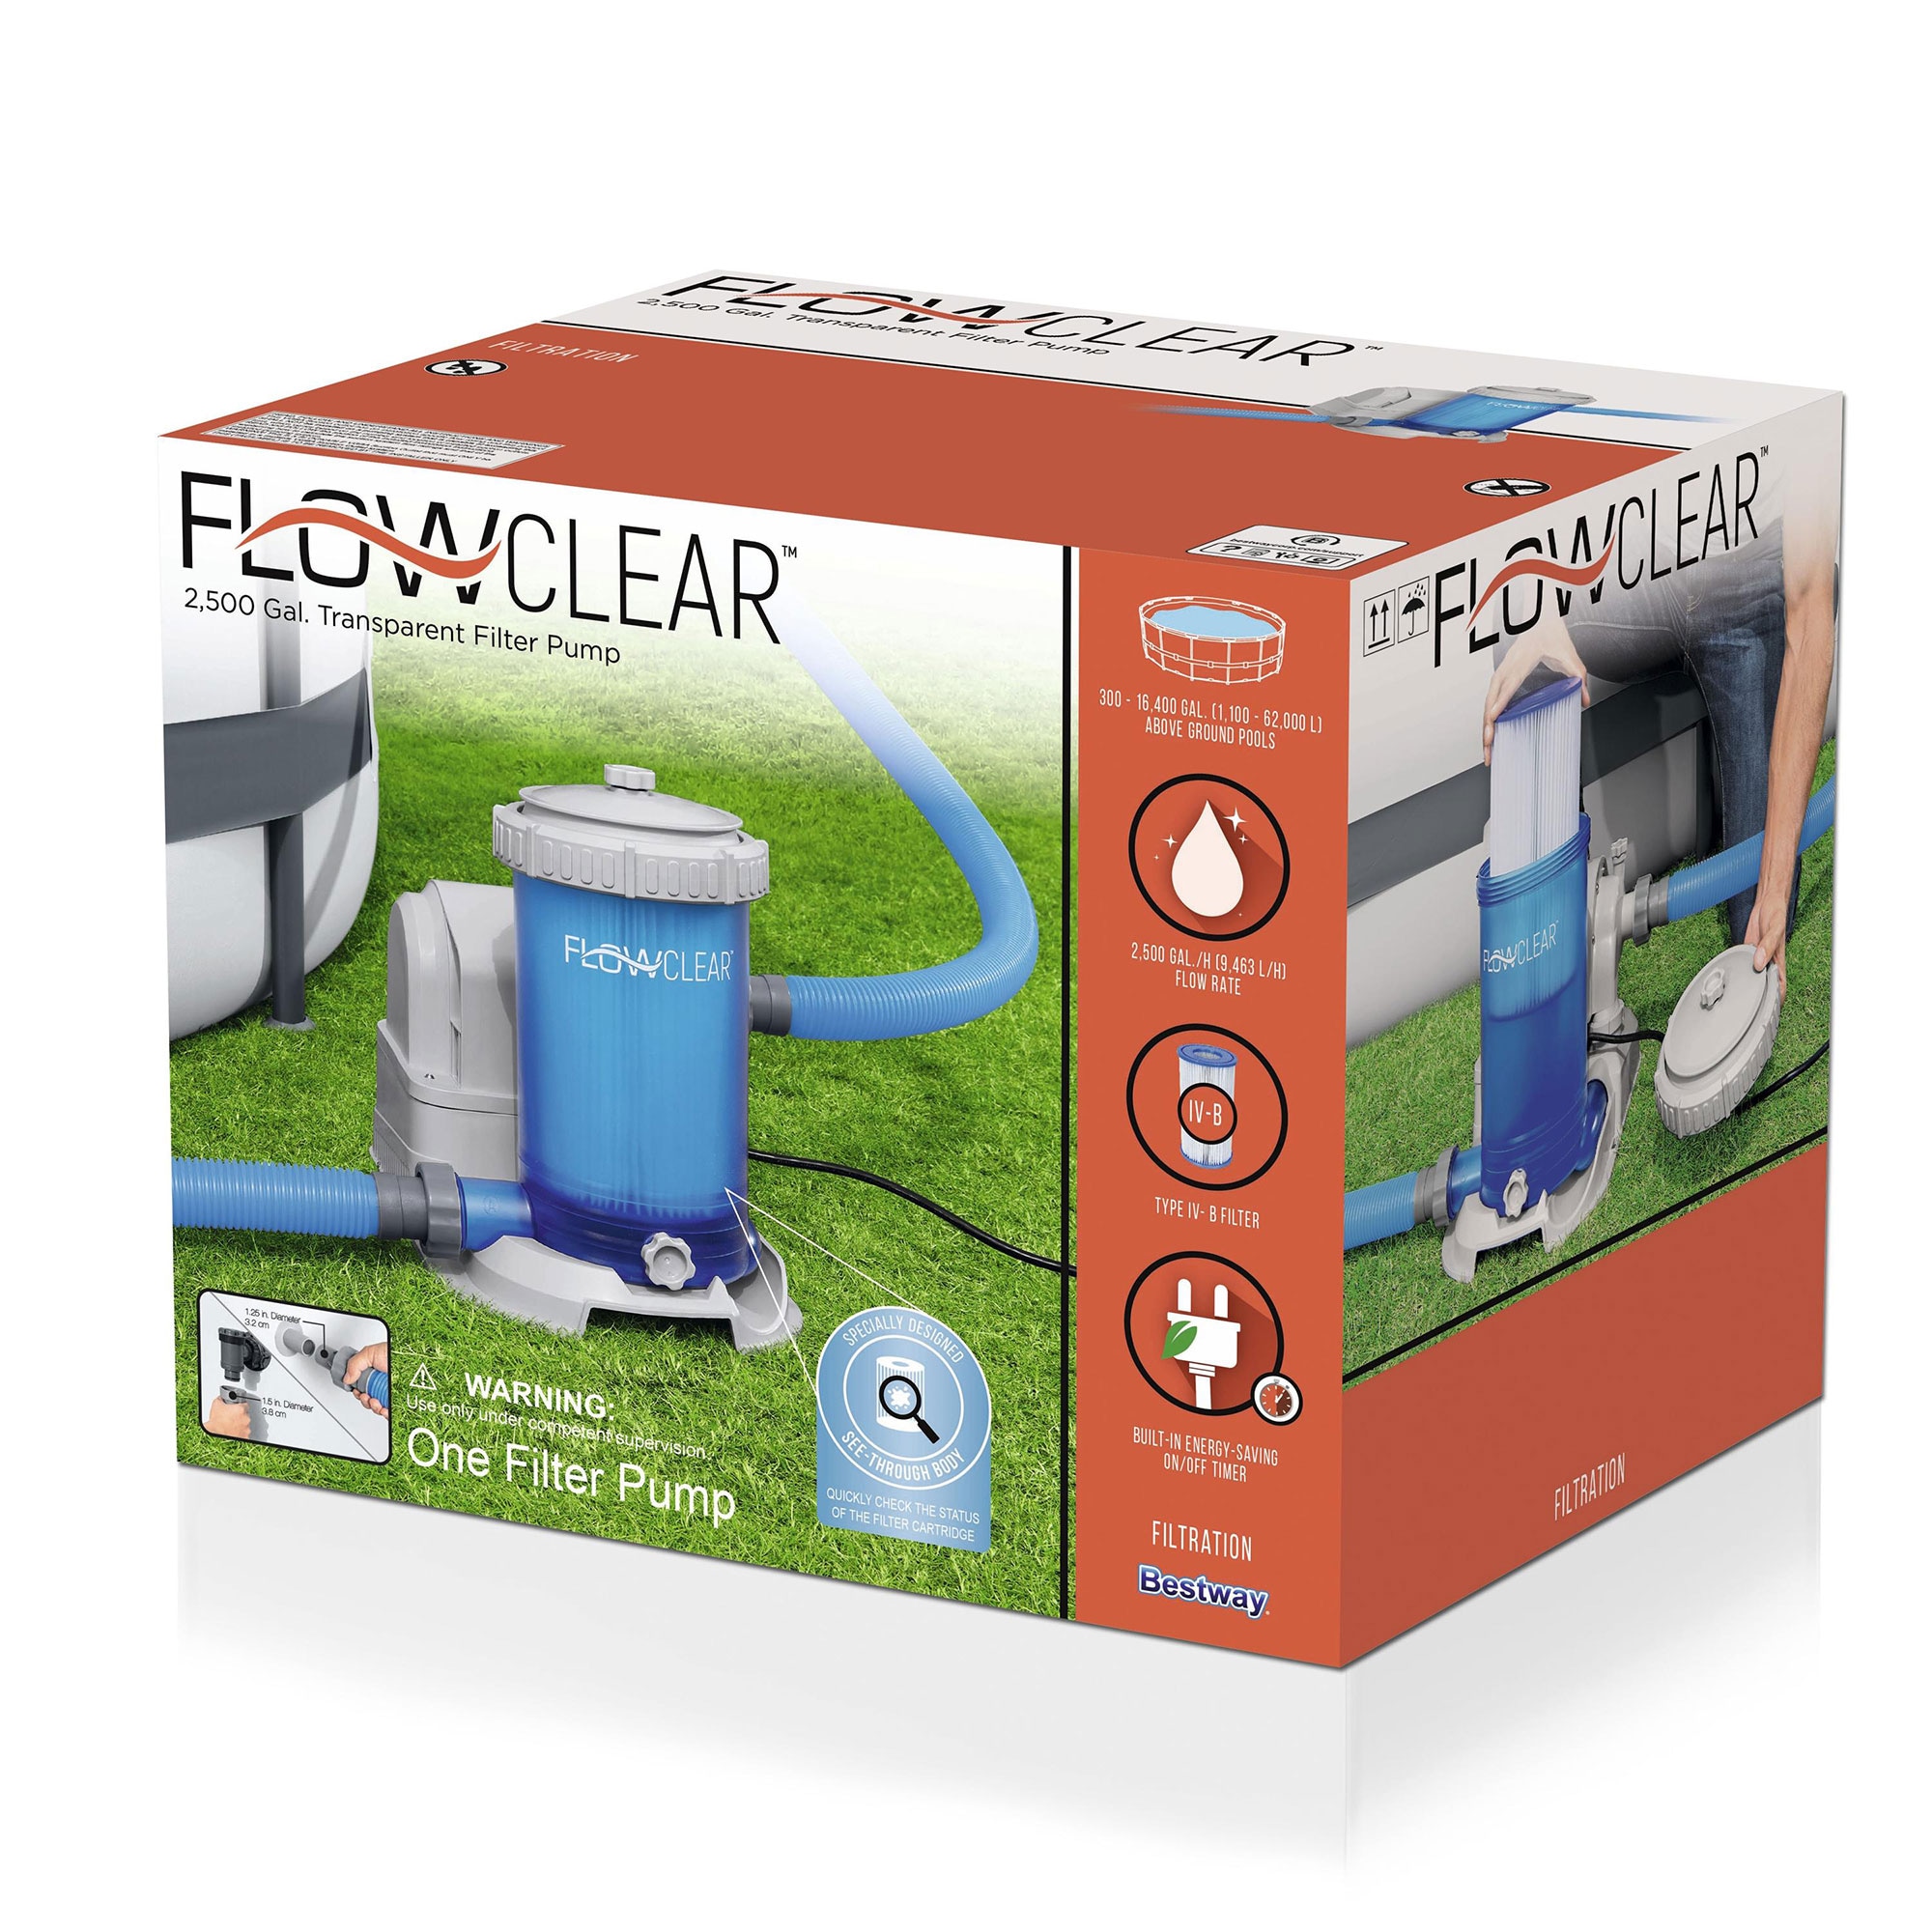 Above 58671E-BW 2500 Bestway Bestway Ground Flowclear Filter at Pump Pool Transparent GPH